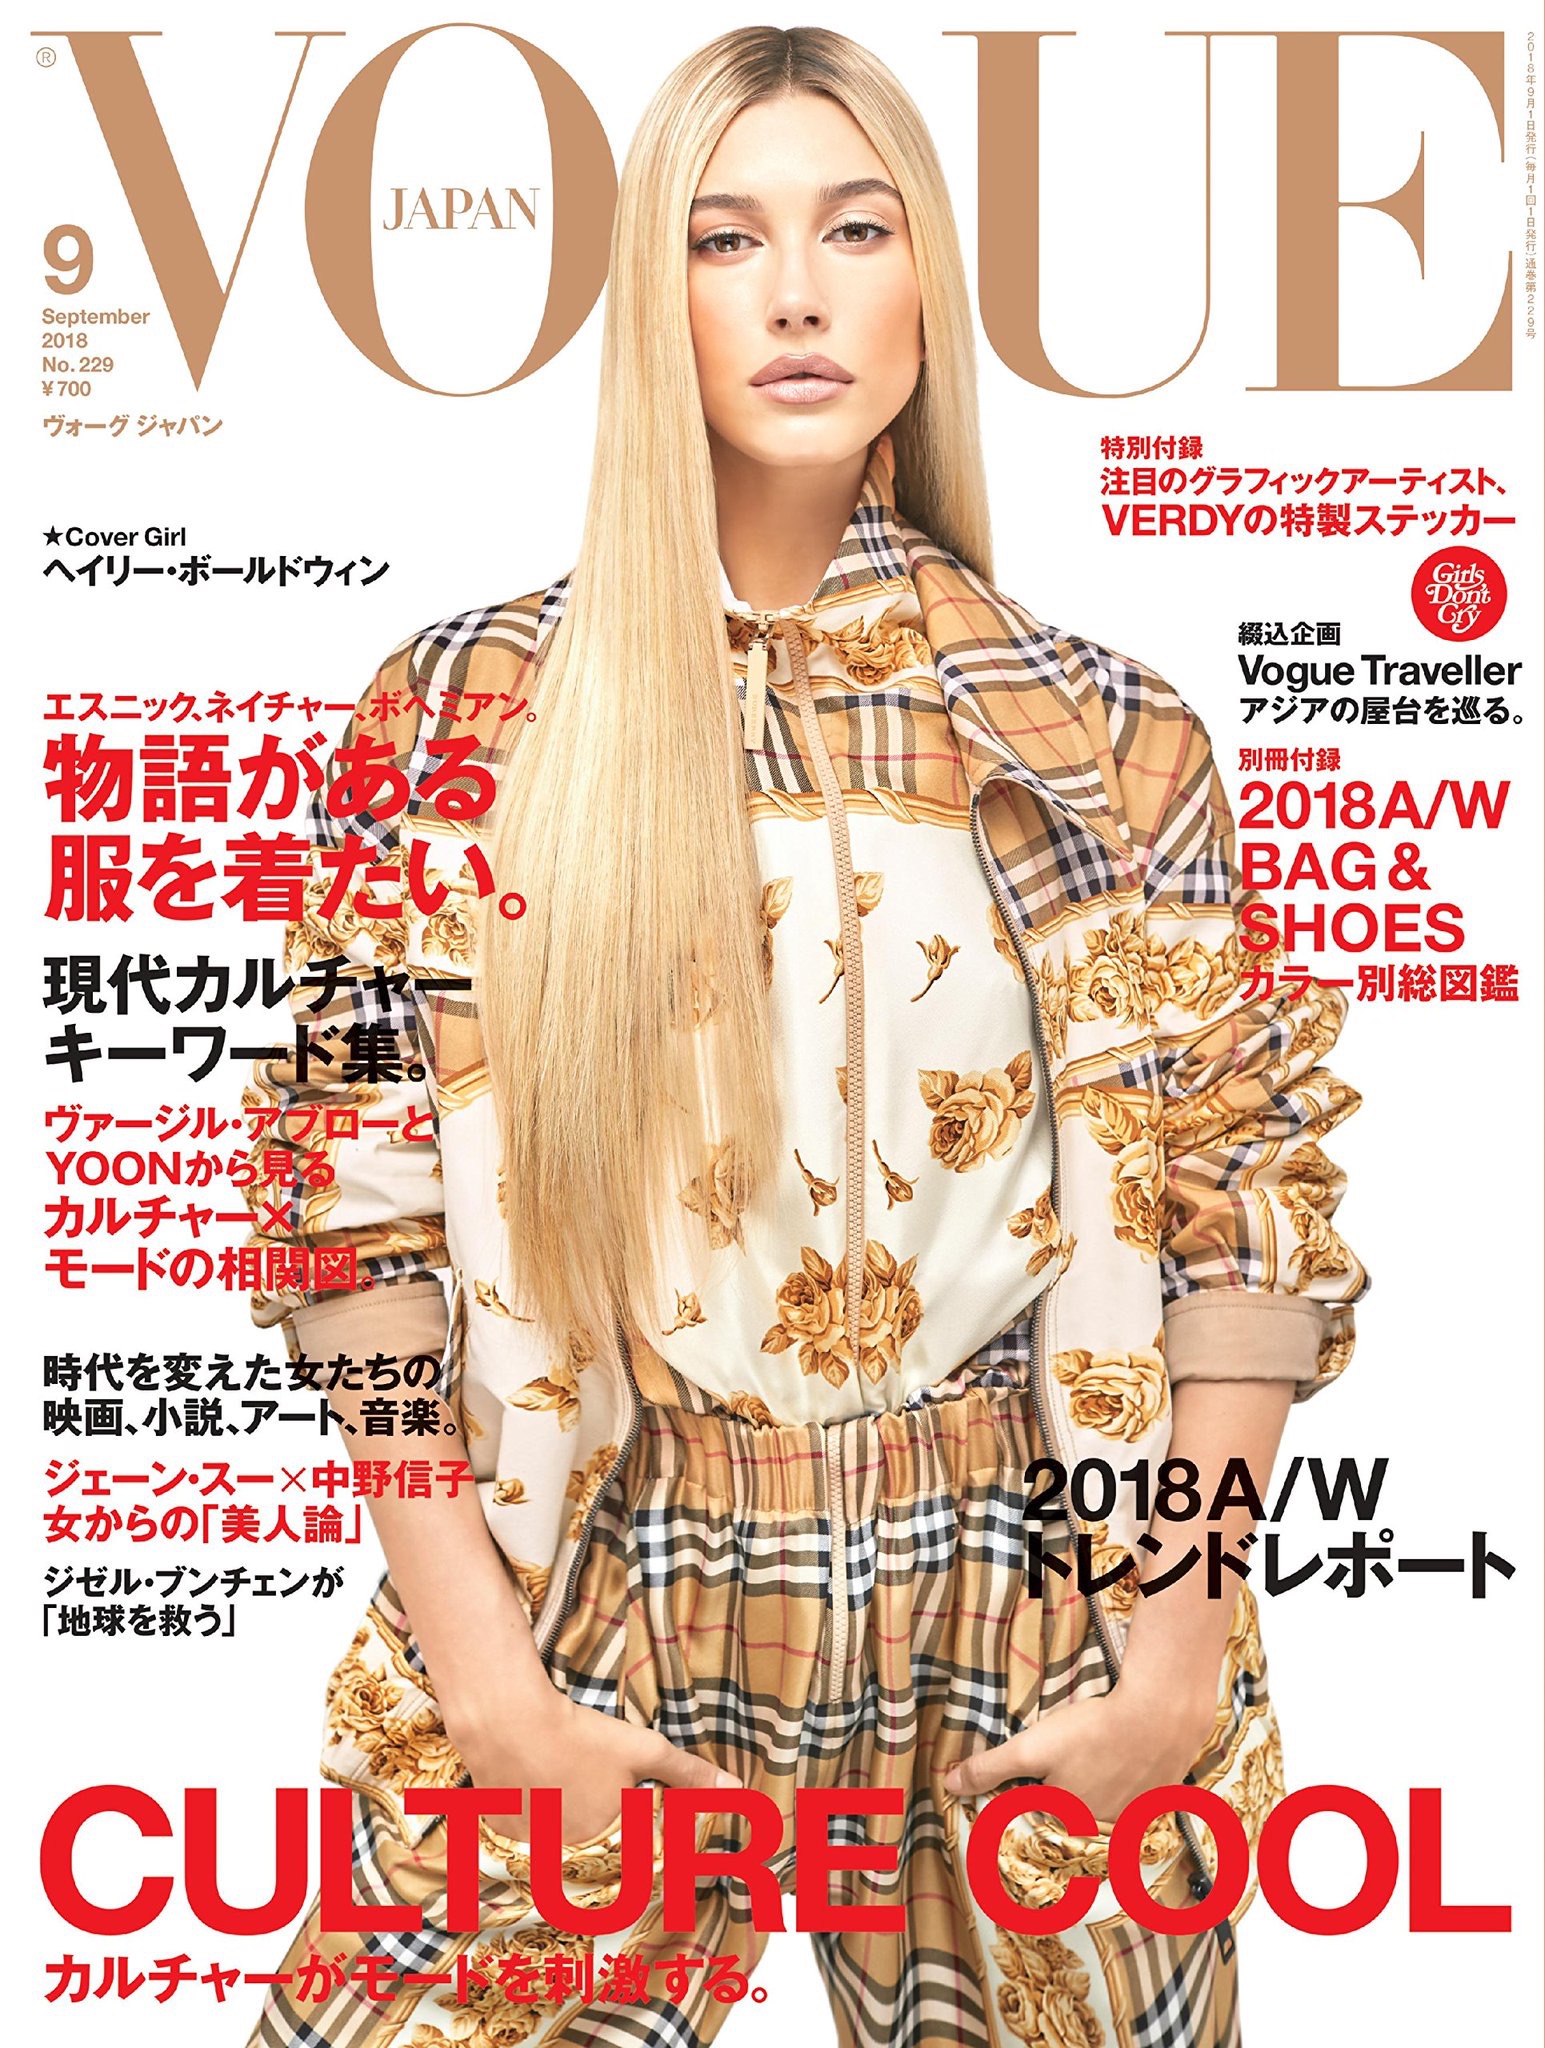 Girls Don't Cry】7月27日（金）発売のVOGUE9月号に特製ステッカーが付属 | UP TO DATE